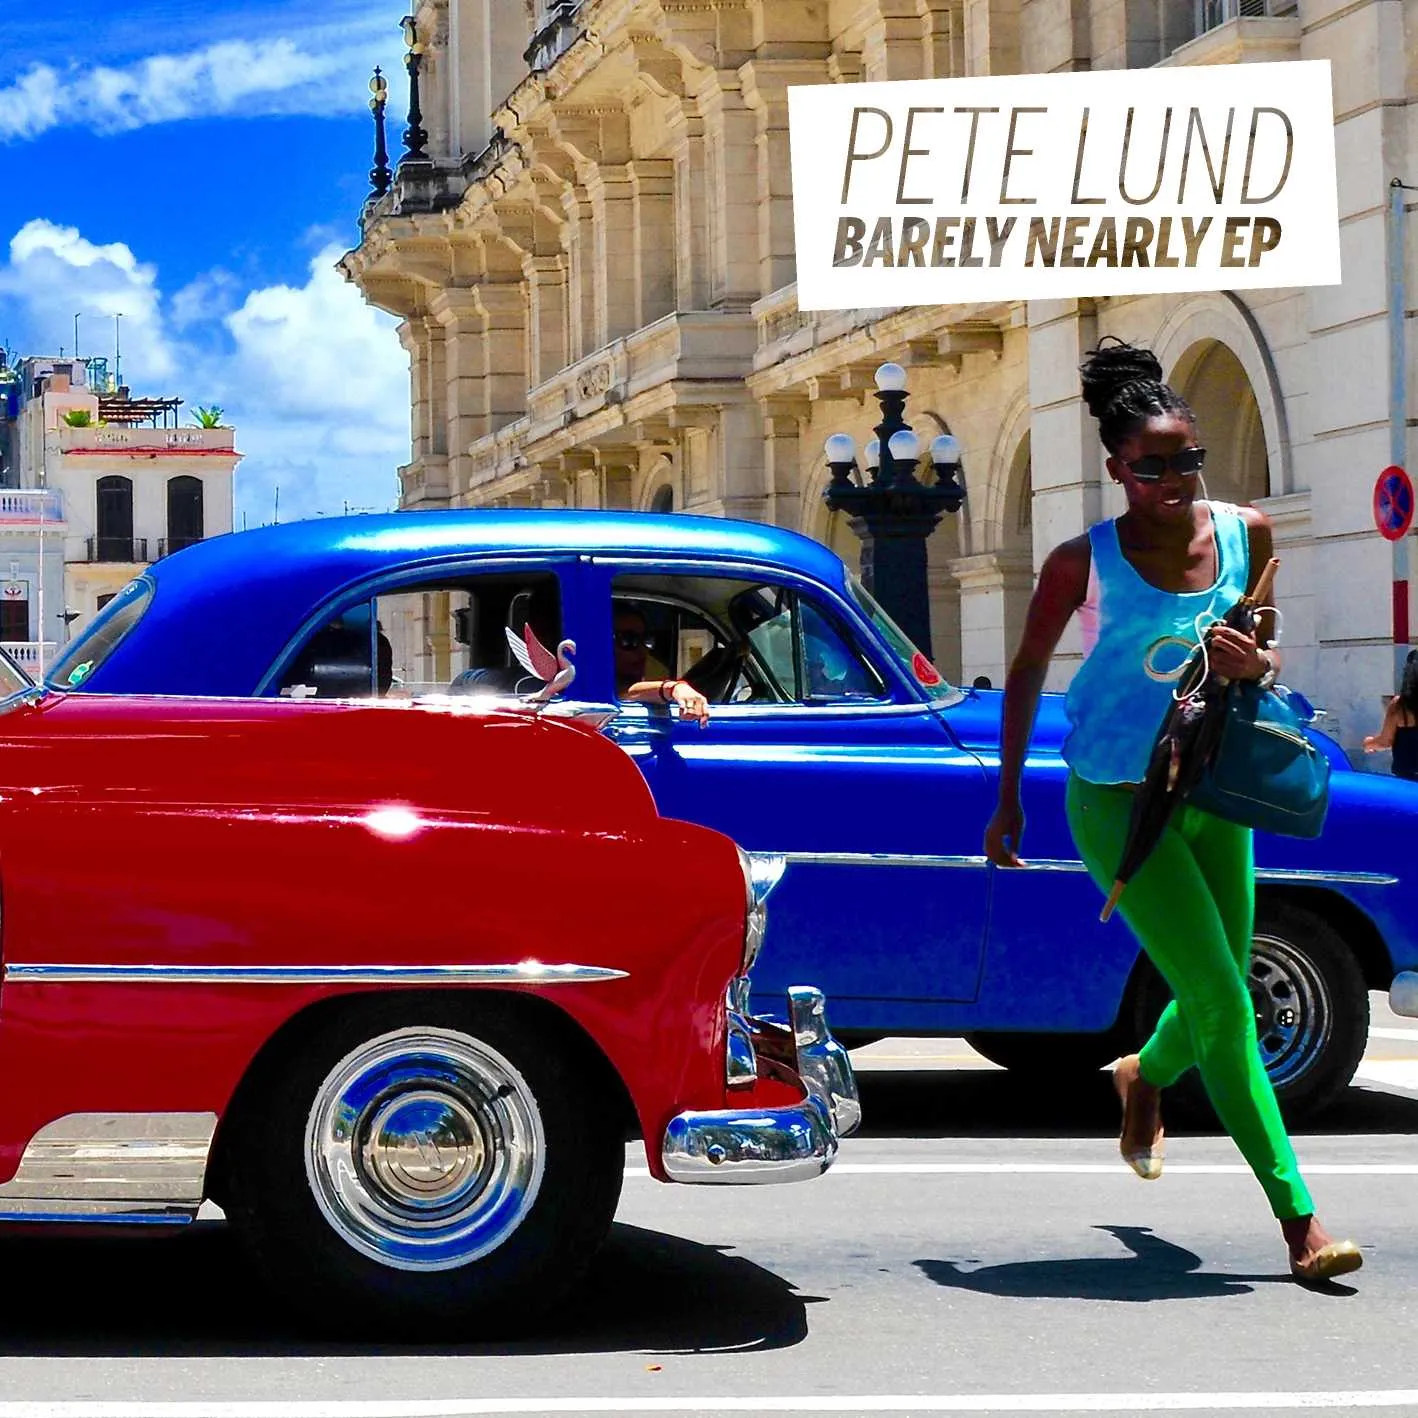 Album cover for “Barely Nearly EP” by Pete Lund